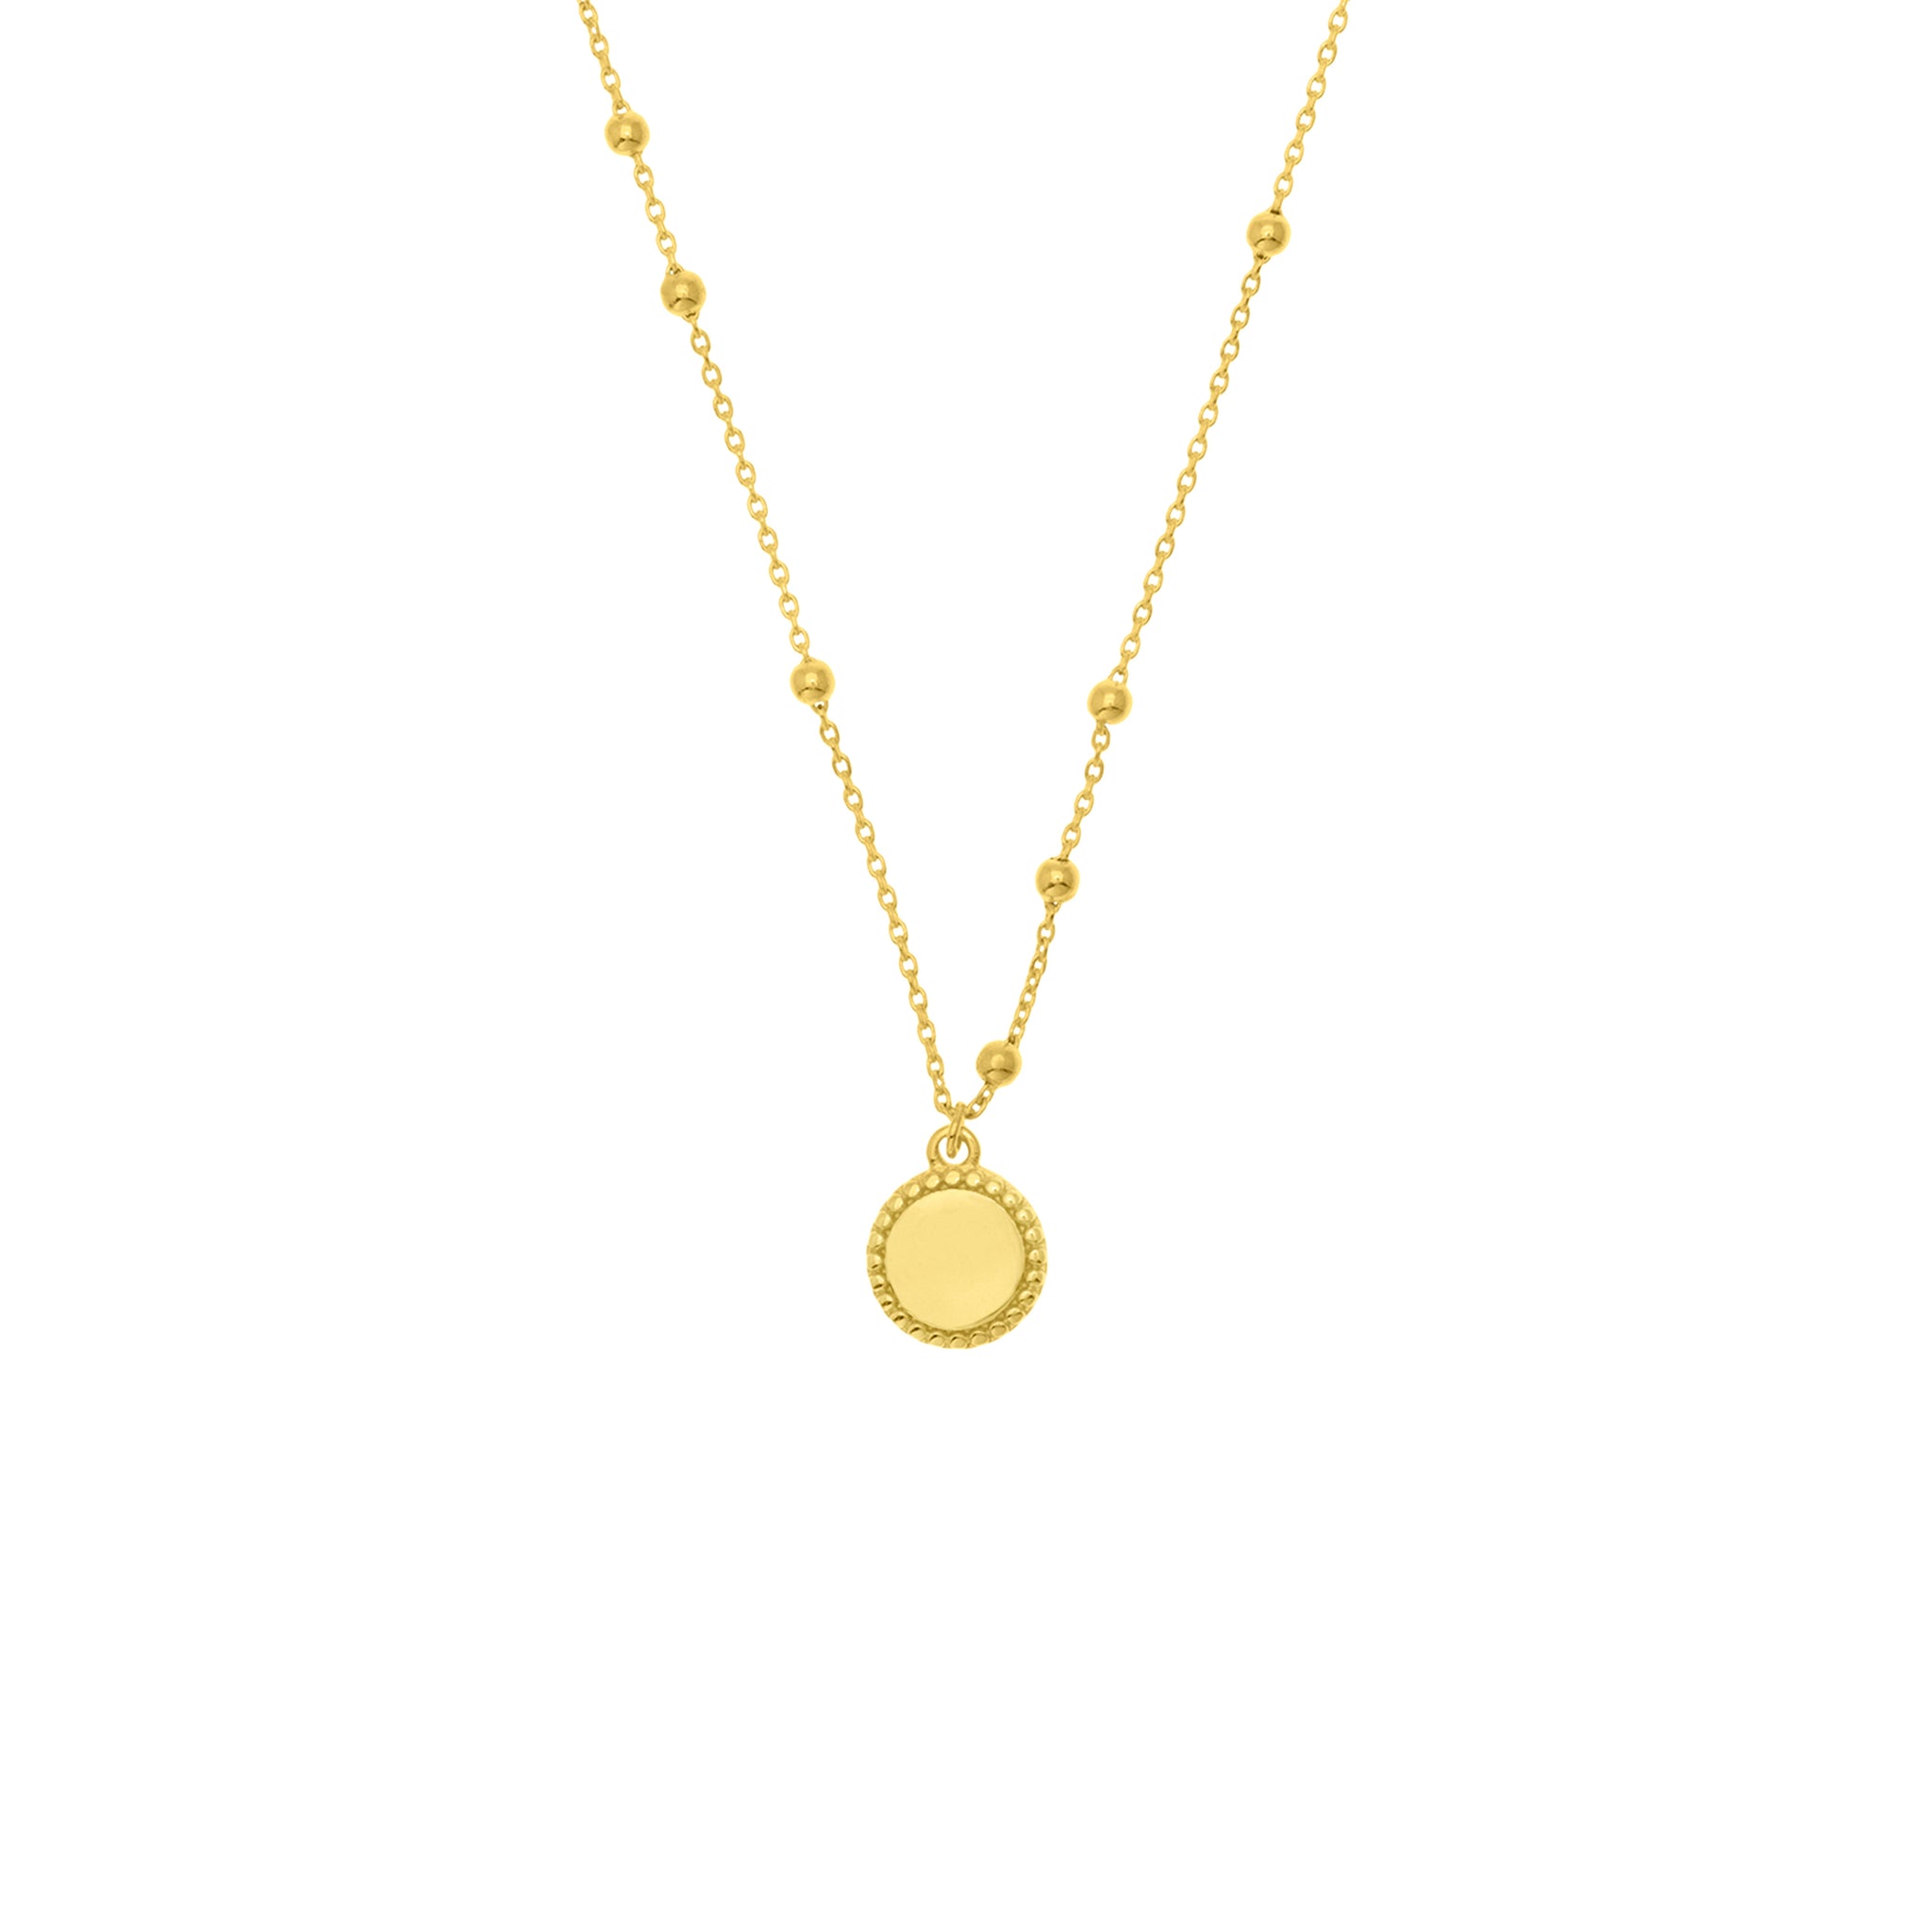 Hemsleys Collection 14K Yellow Gold Engravable Disc Necklace